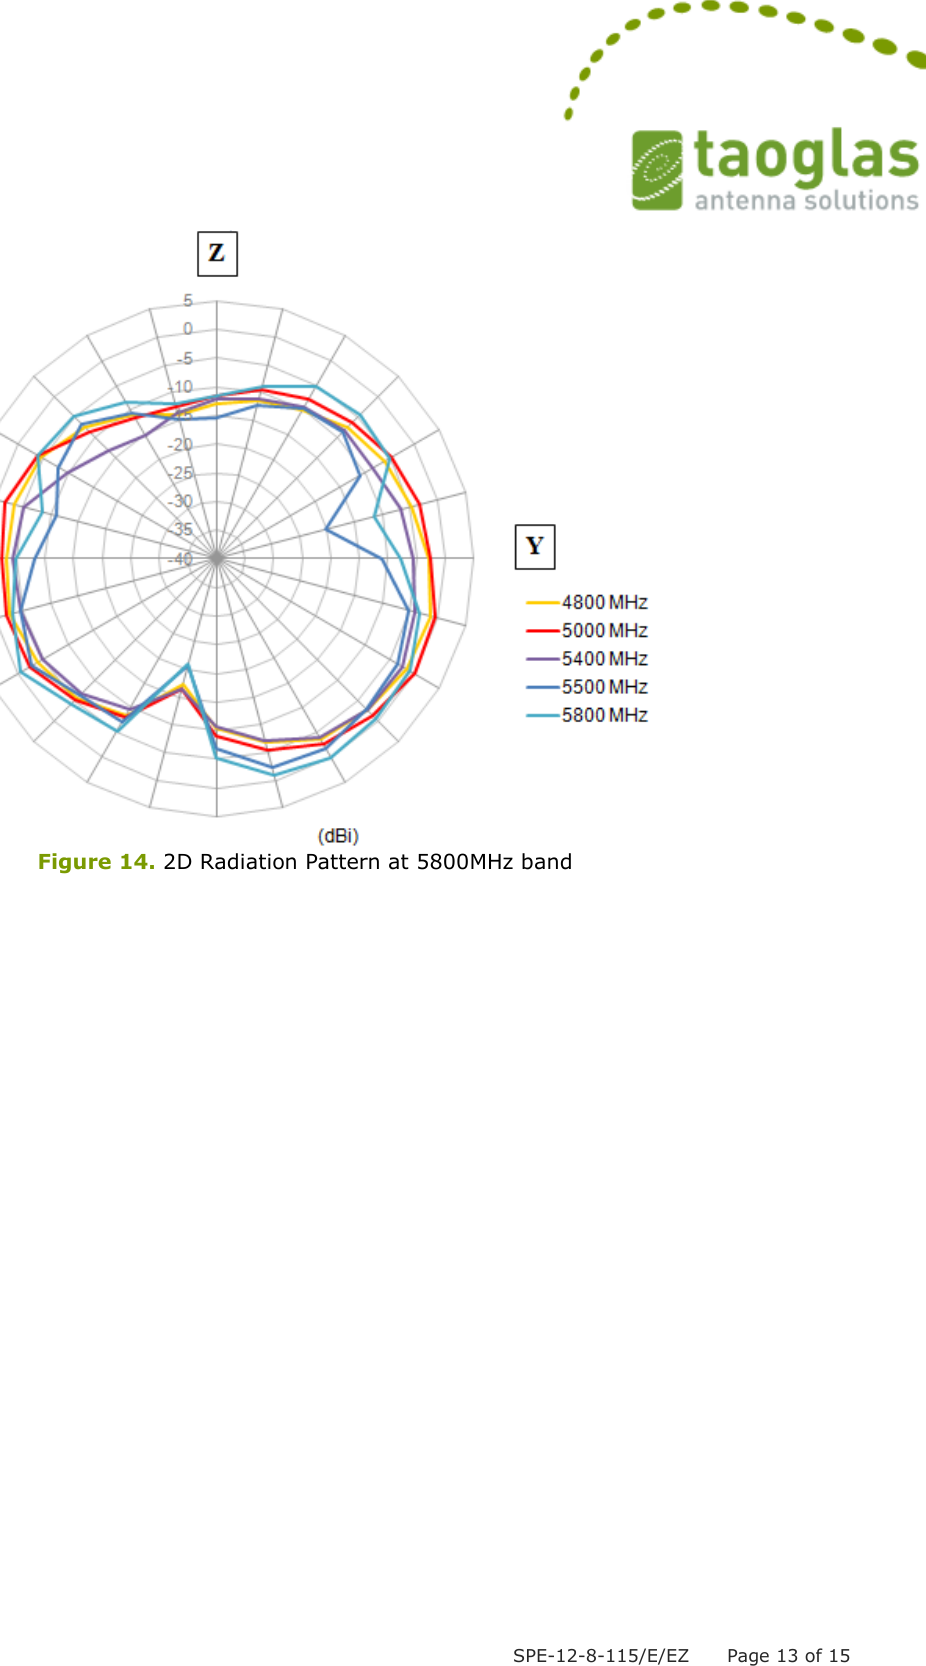  SPE-12-8-115/E/EZ      Page 13 of 15  Figure 14. 2D Radiation Pattern at 5800MHz band 